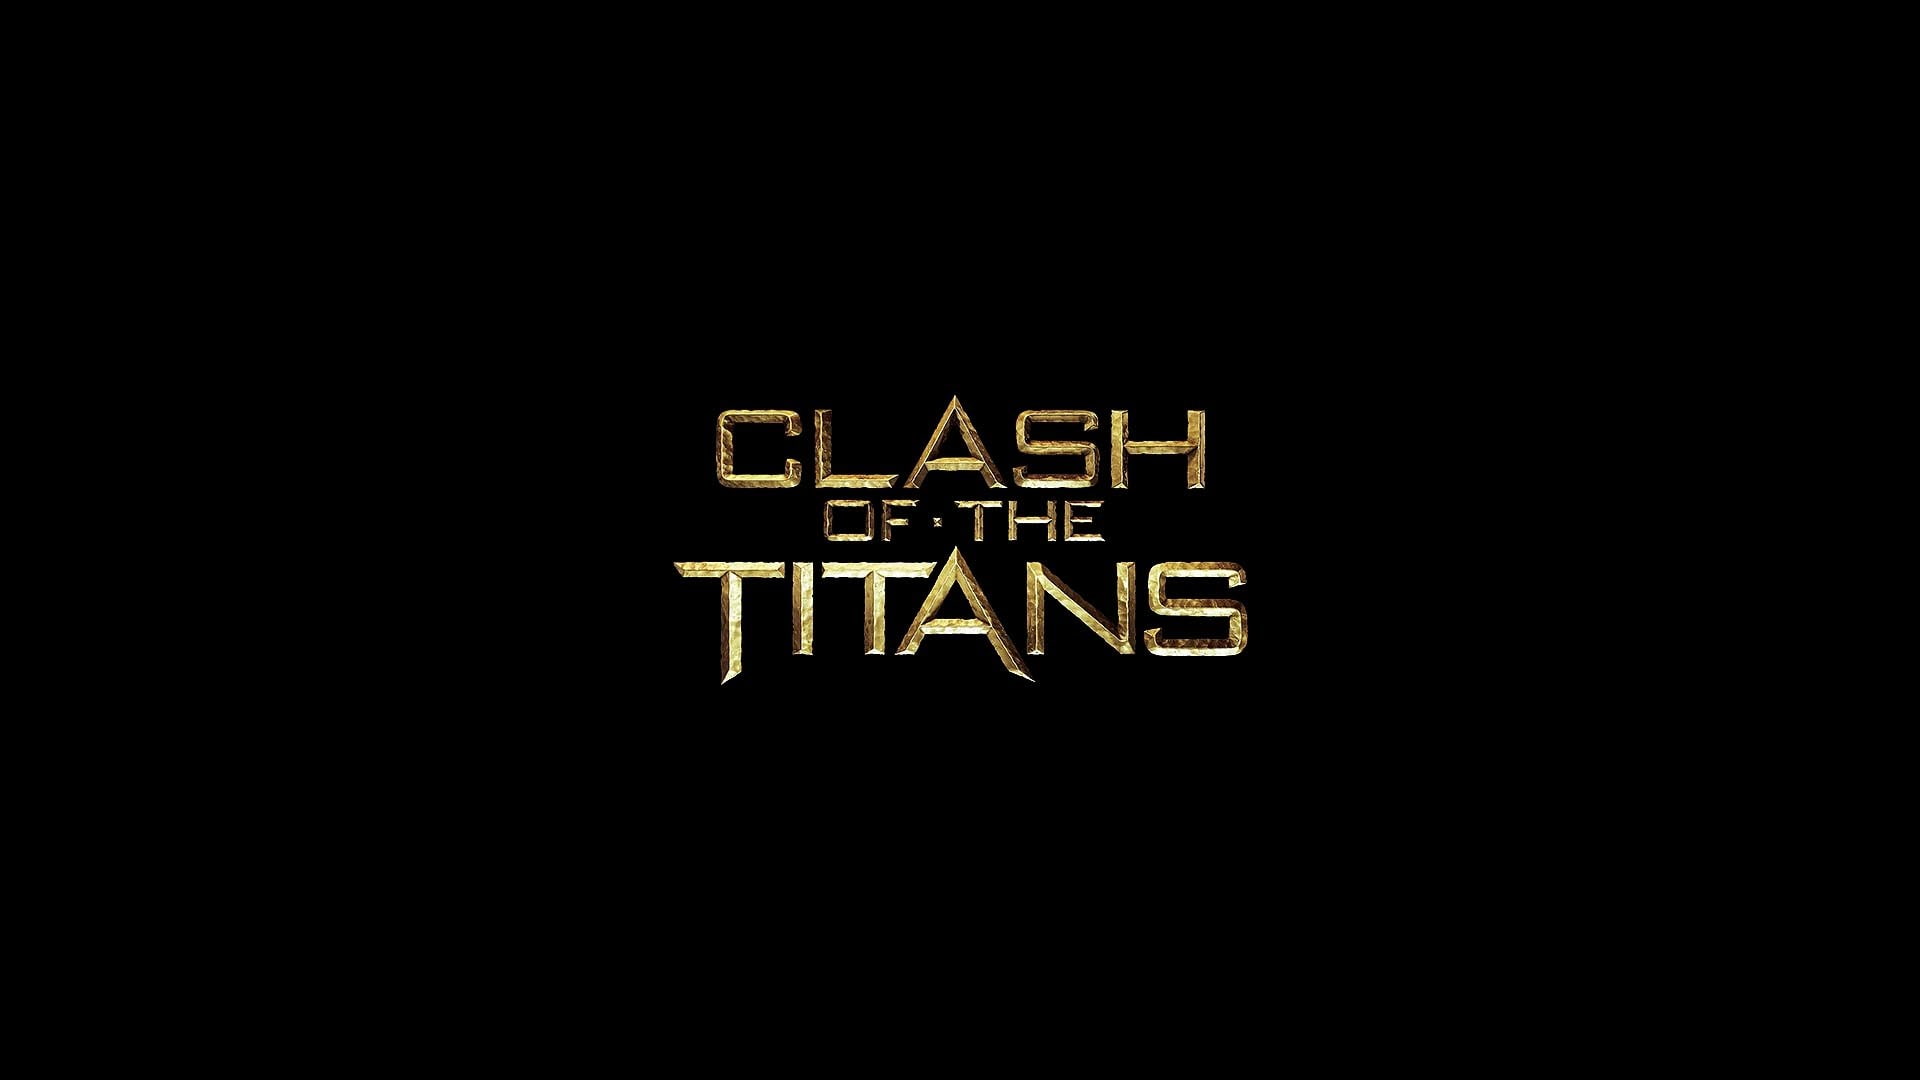 clash of the titans 2010, text, copy space, black background